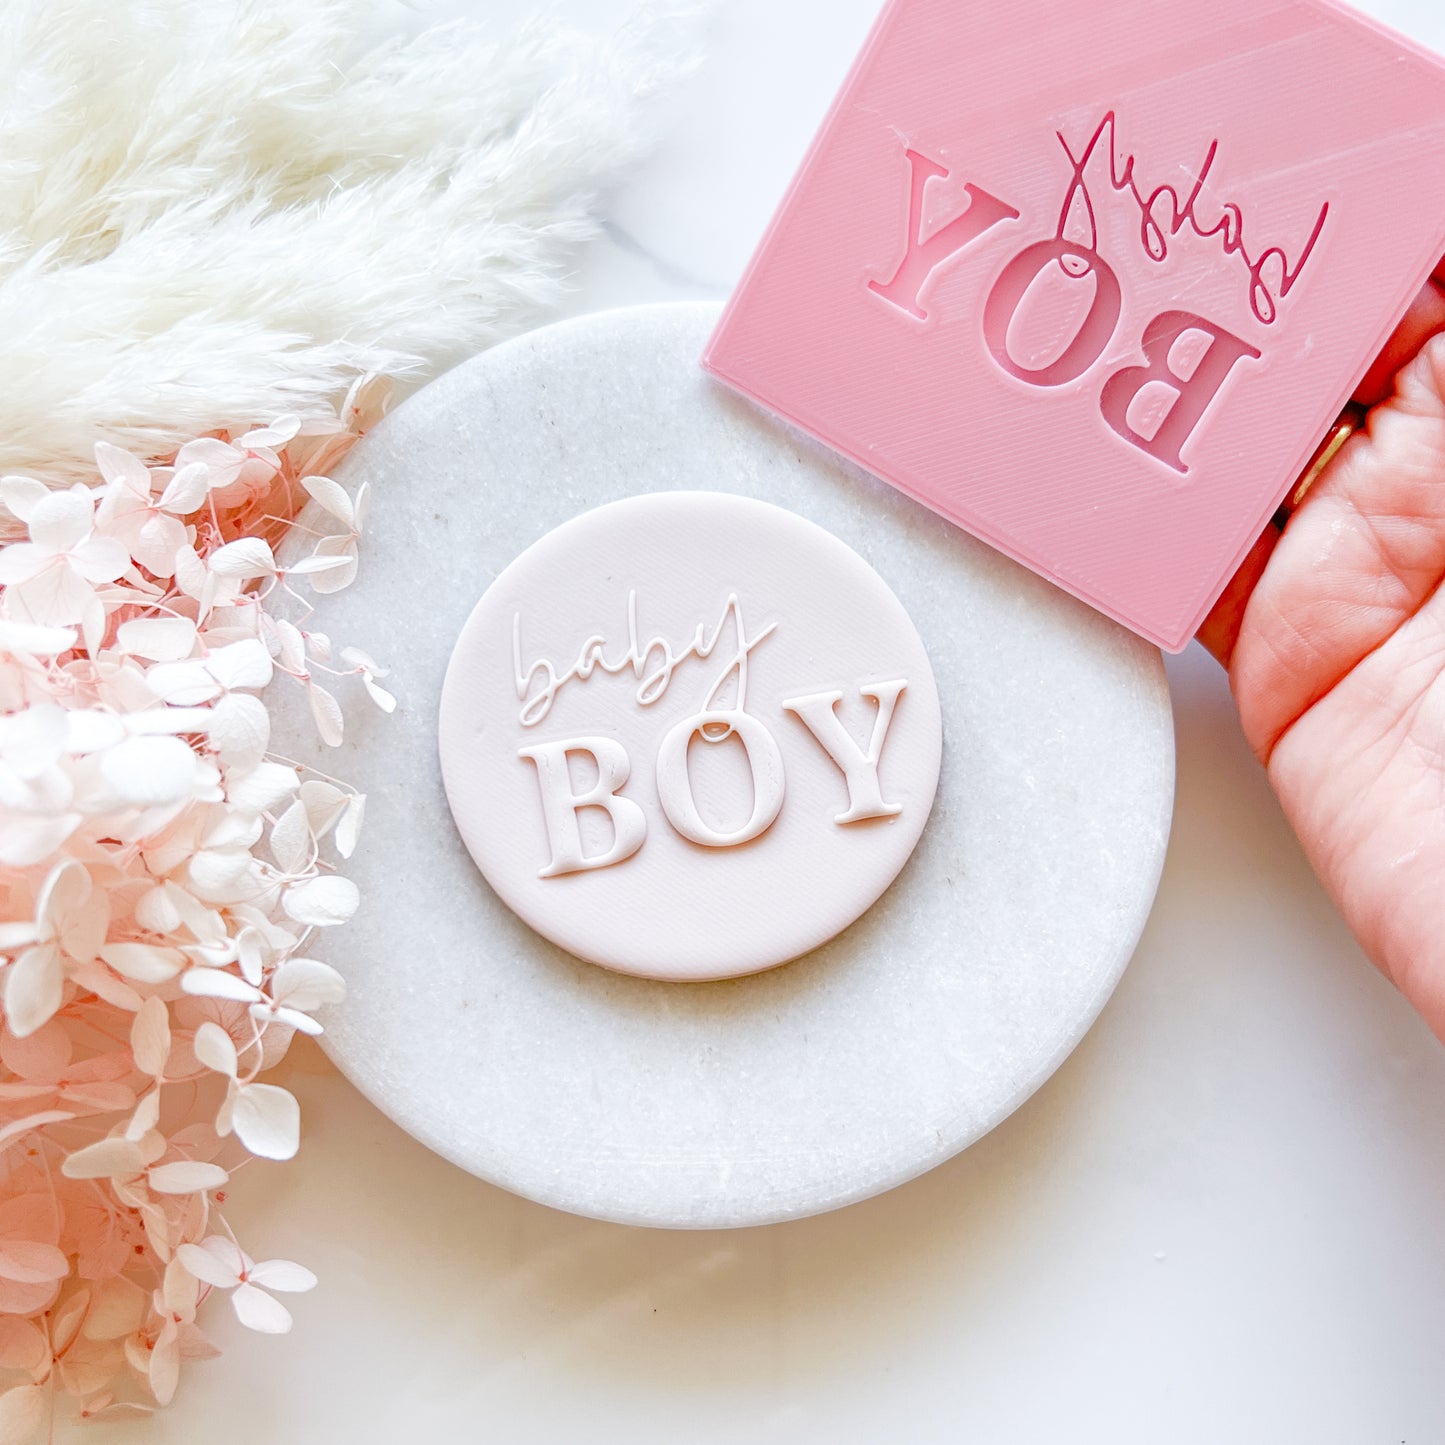 "Baby Boy" - Embossing Stamp